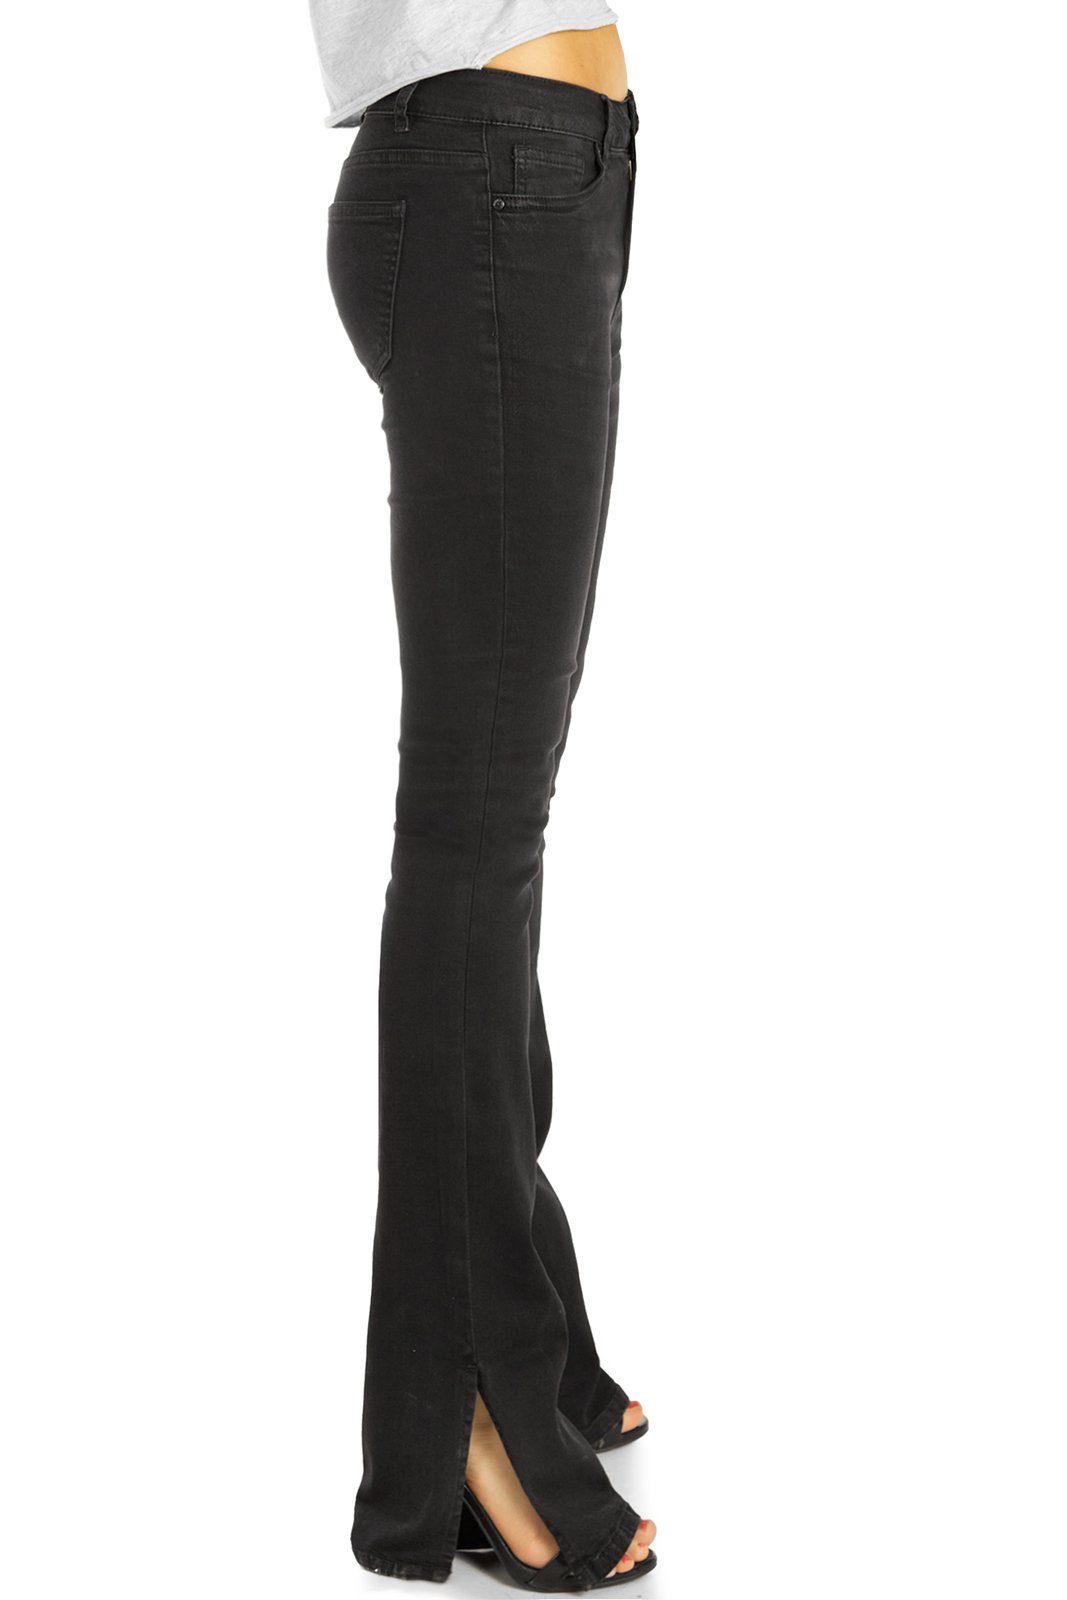 be styled Bootcut-Jeans Bootcut j27r cut mid - Jeans Damen mit Hose out waist - mit 5-Pocket-Style Stretch-Anteil